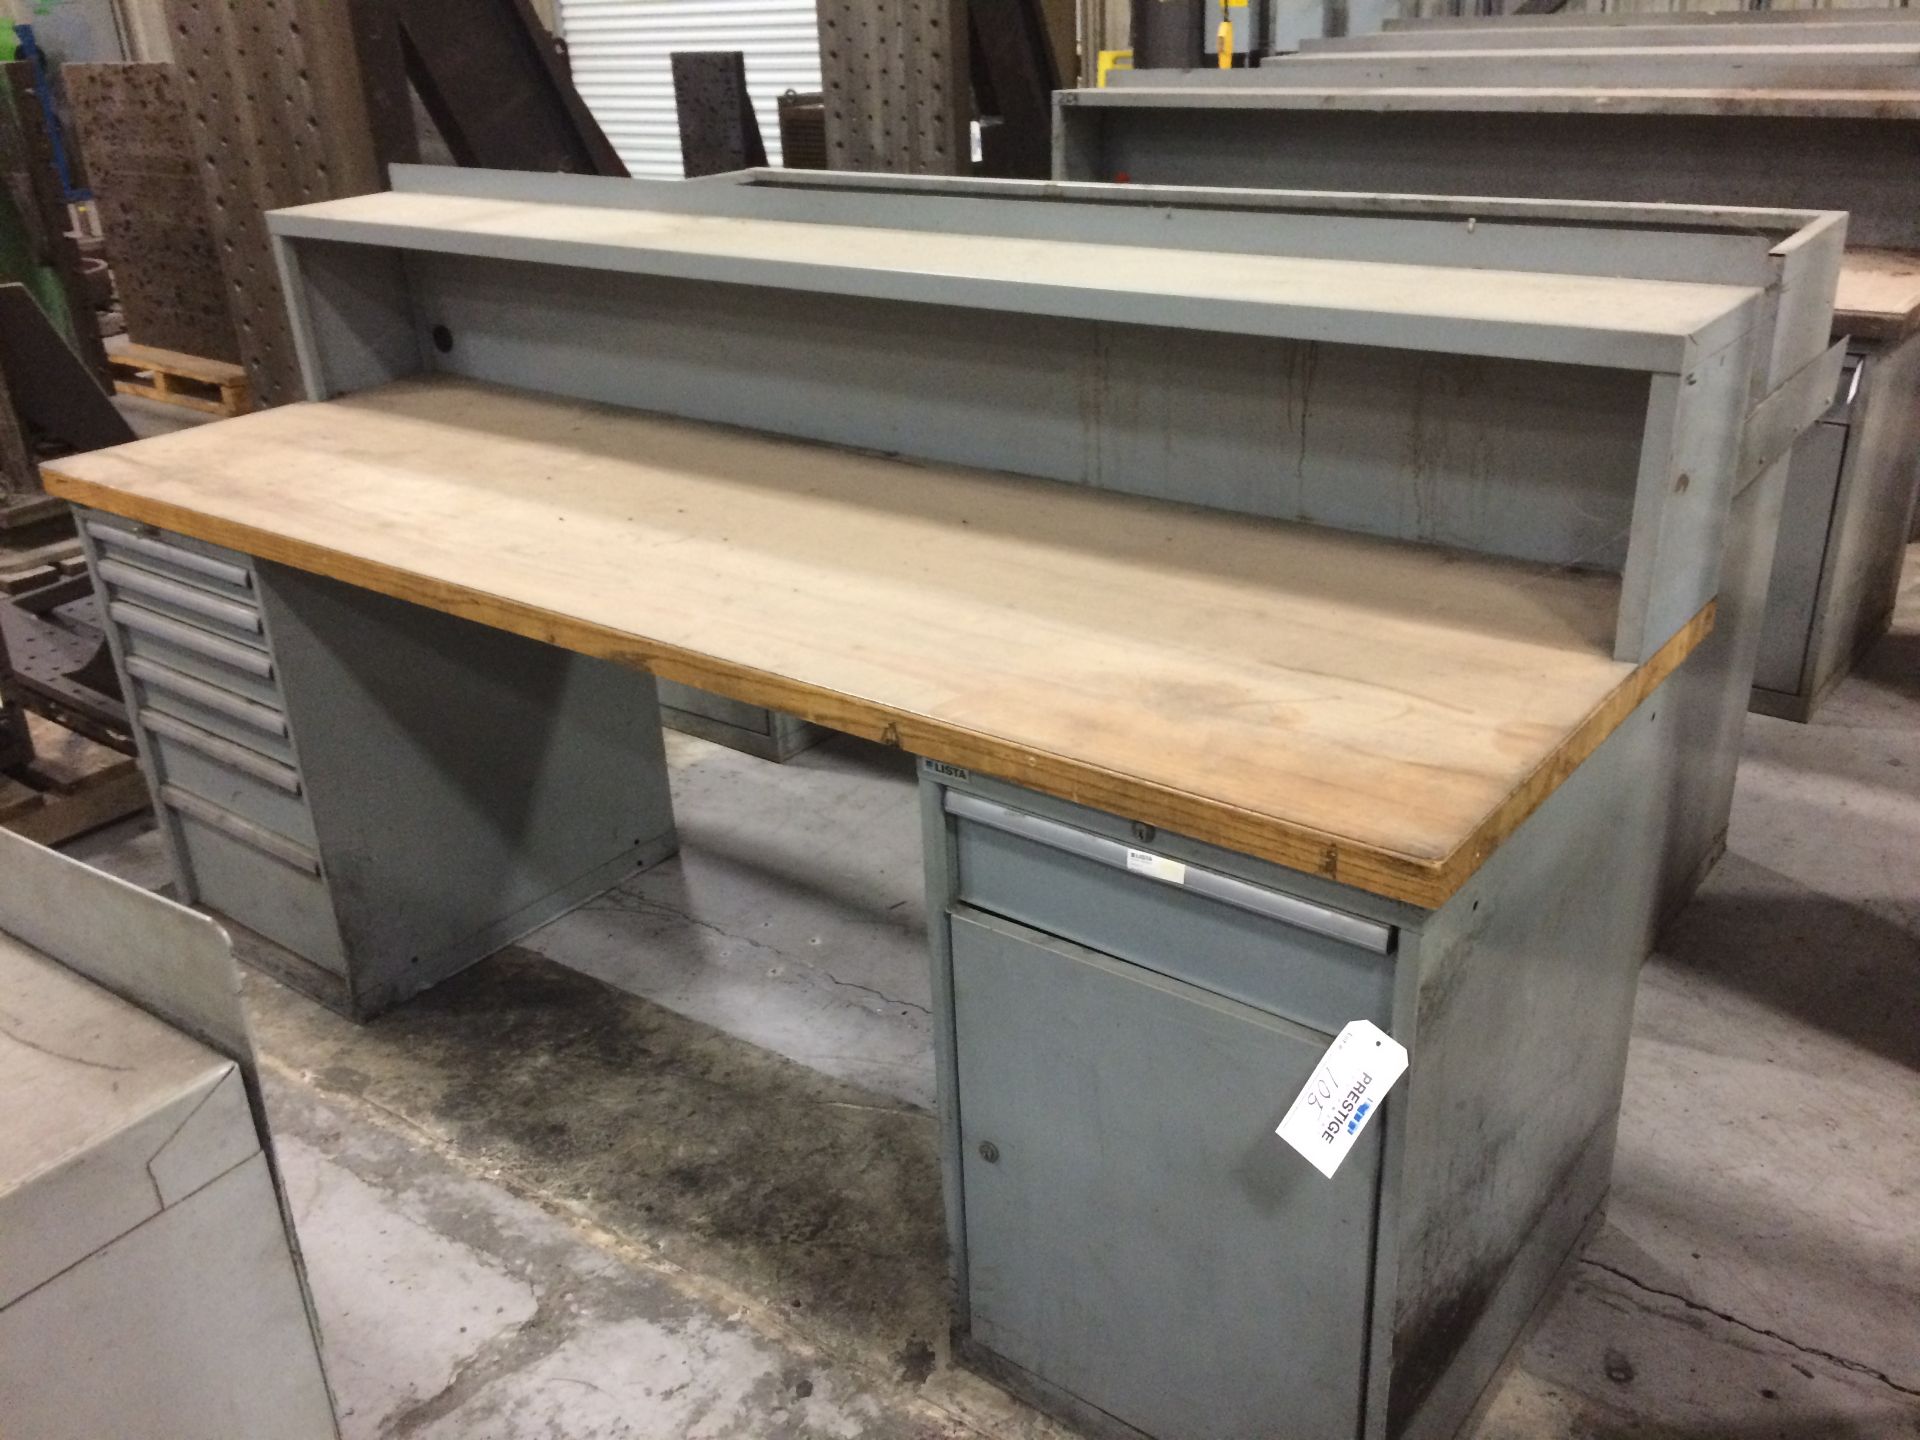 8' LISTA WOOD TOP WORK BENCH WITH 7 DRAWERS AND STORAGE